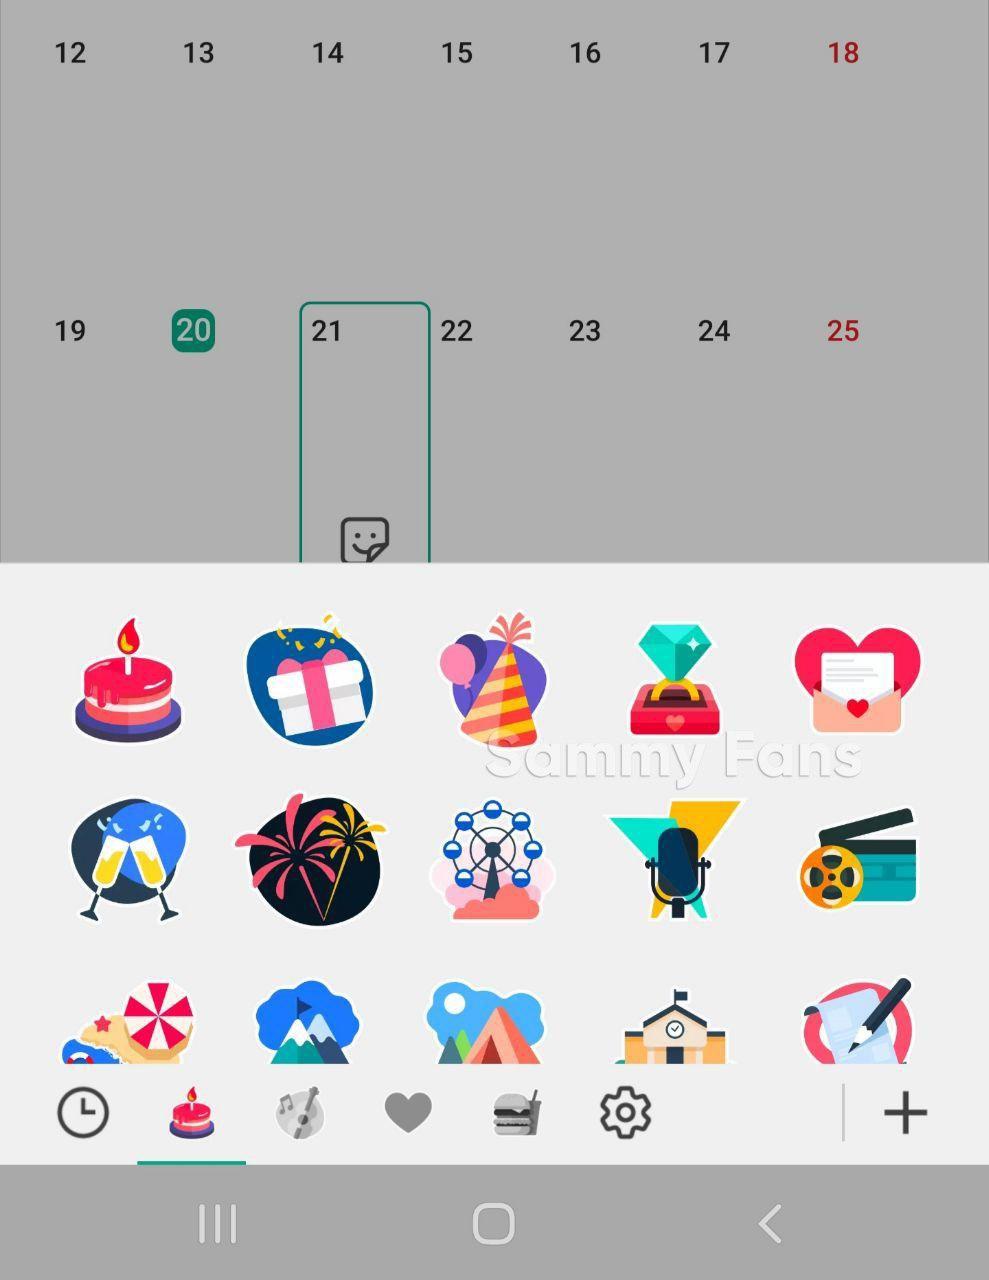 You can now add stickers to events in Samsung Calendar to remember them